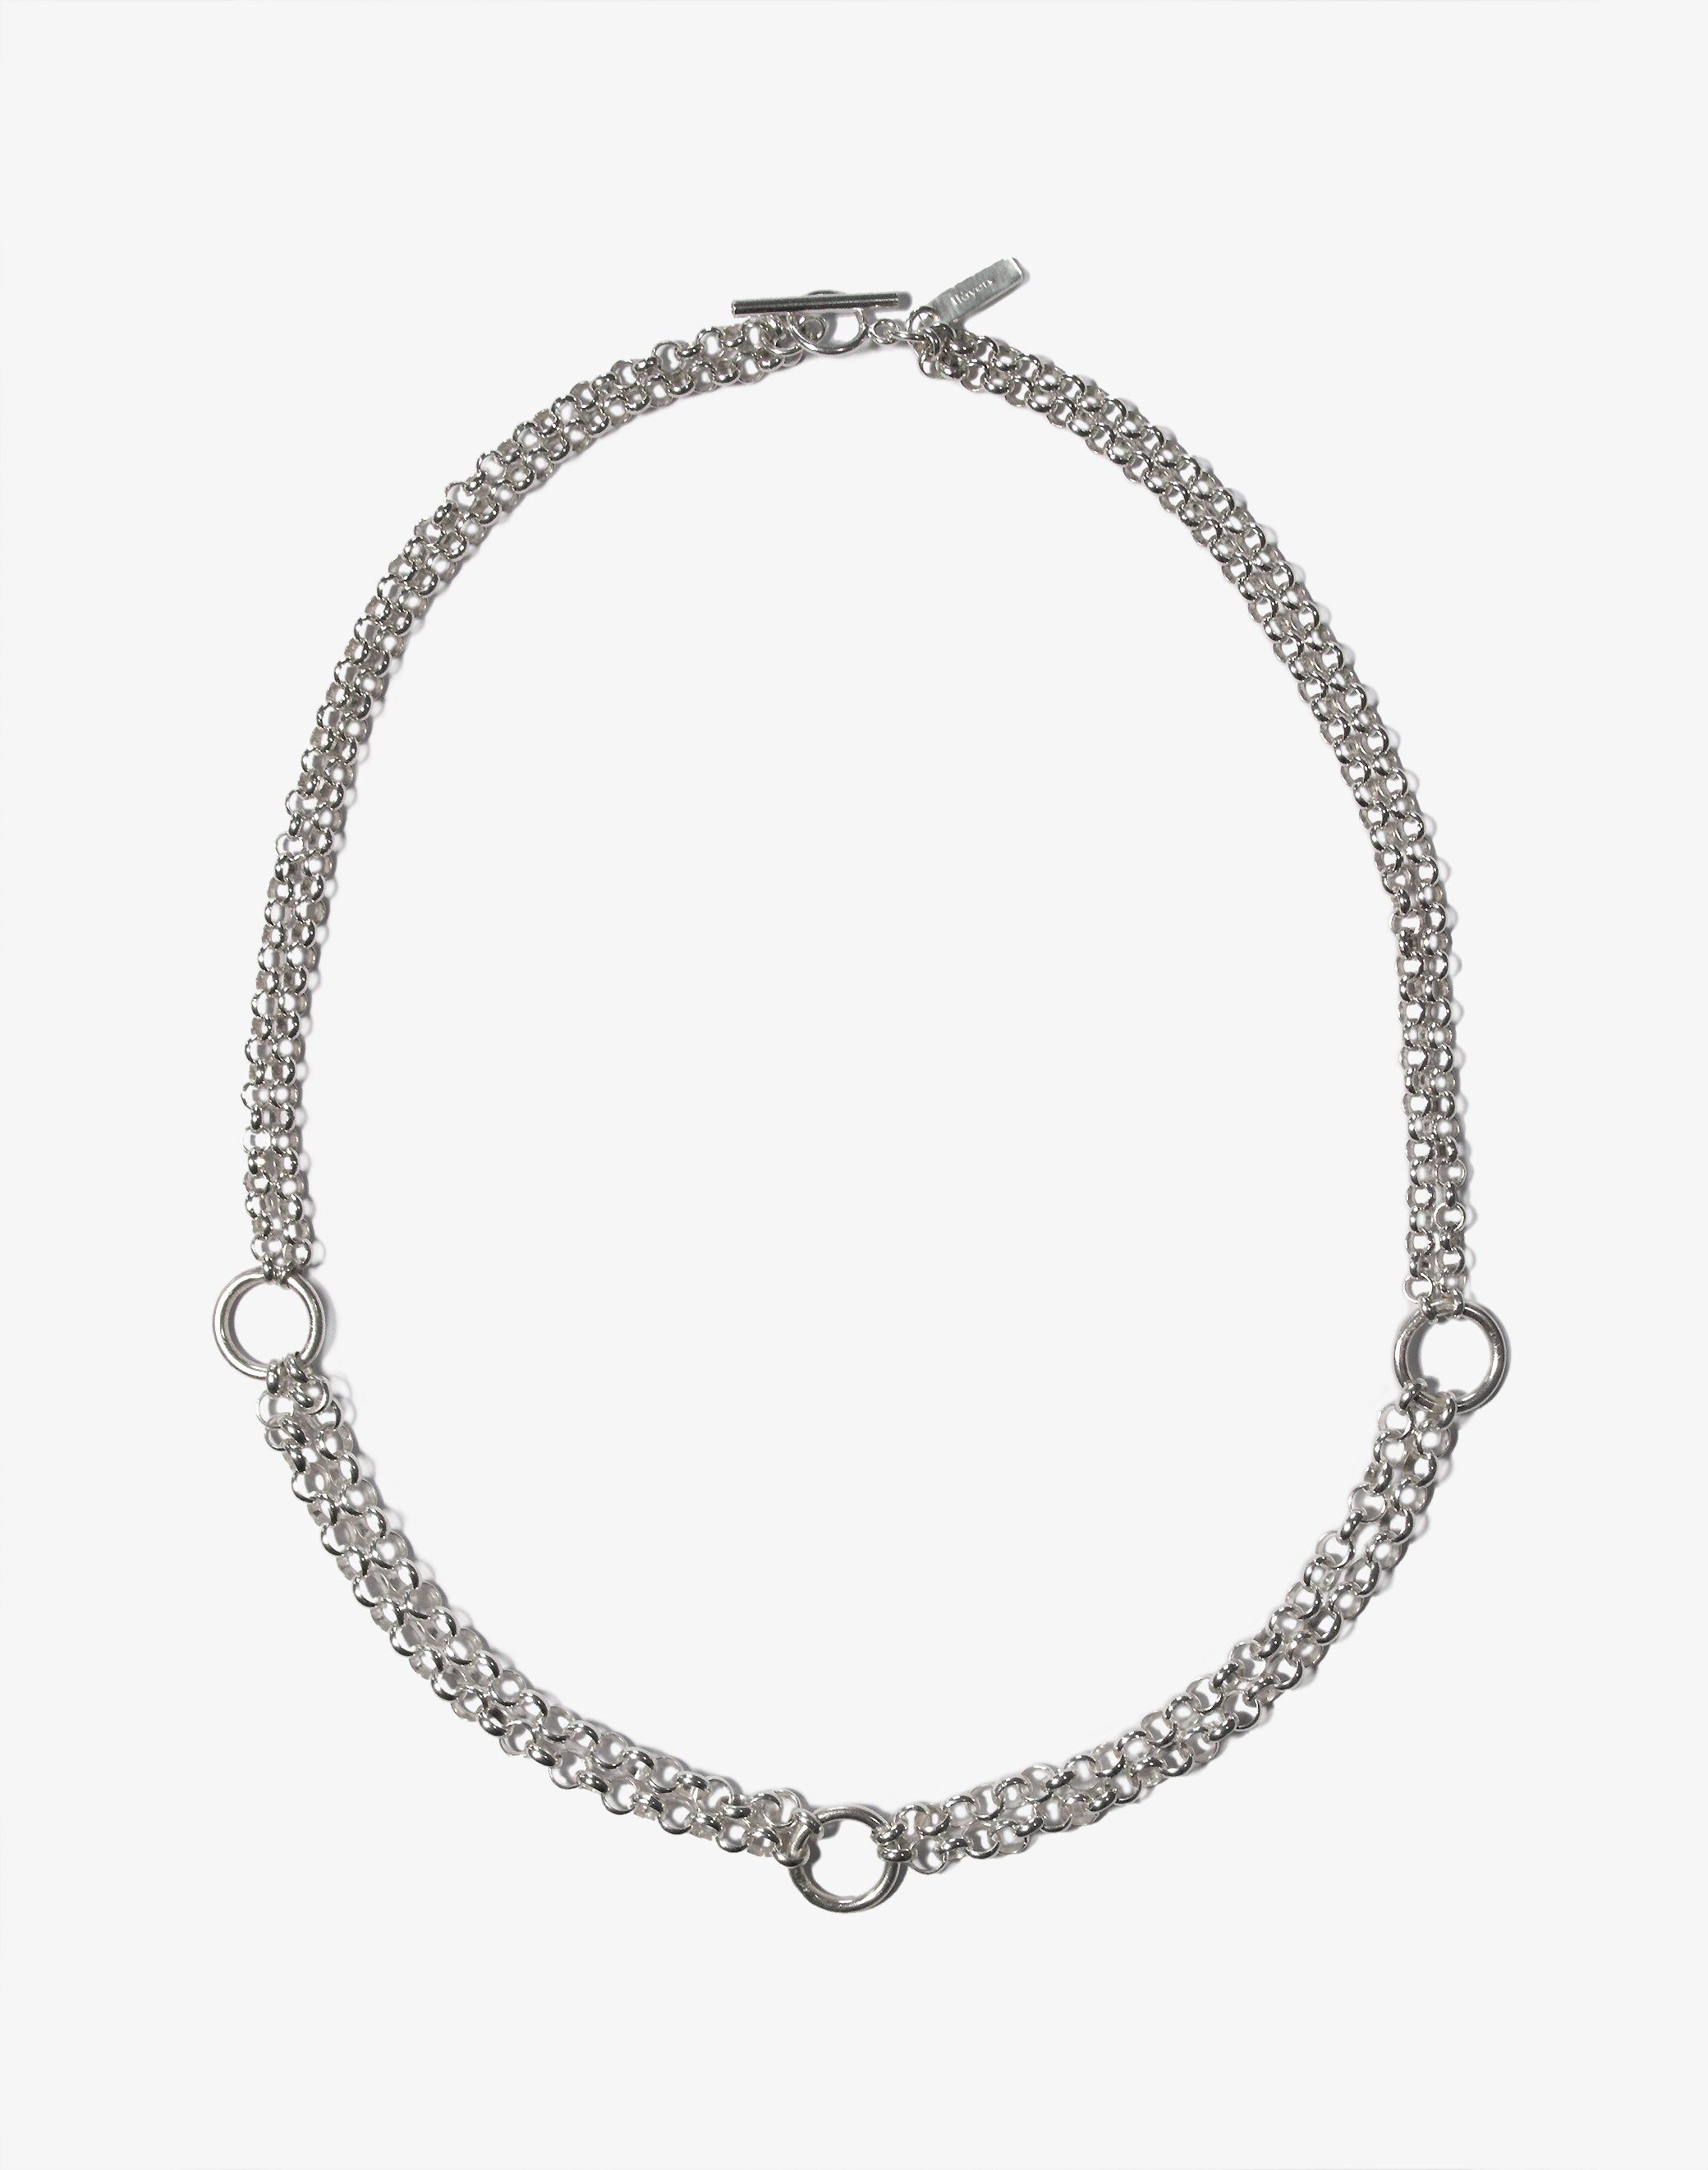 llayers jewelry Silver unisex men long chain necklace choker handcrafted in New York 1